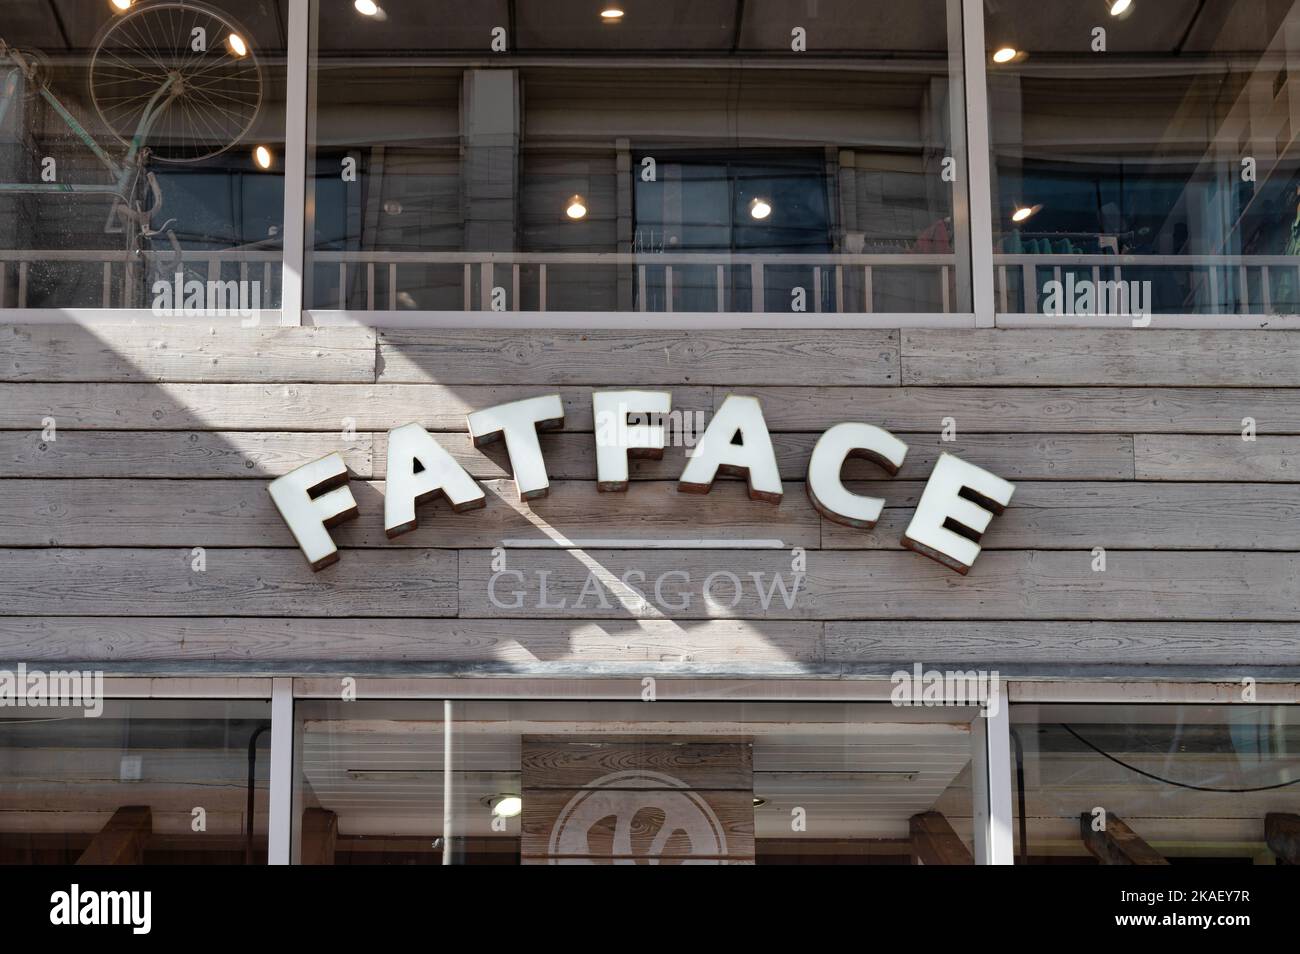 Glasgow, UK- Sept 10, 2022: The sign for Fatface clothing store in downtown Glasgow, Scotland Stock Photo